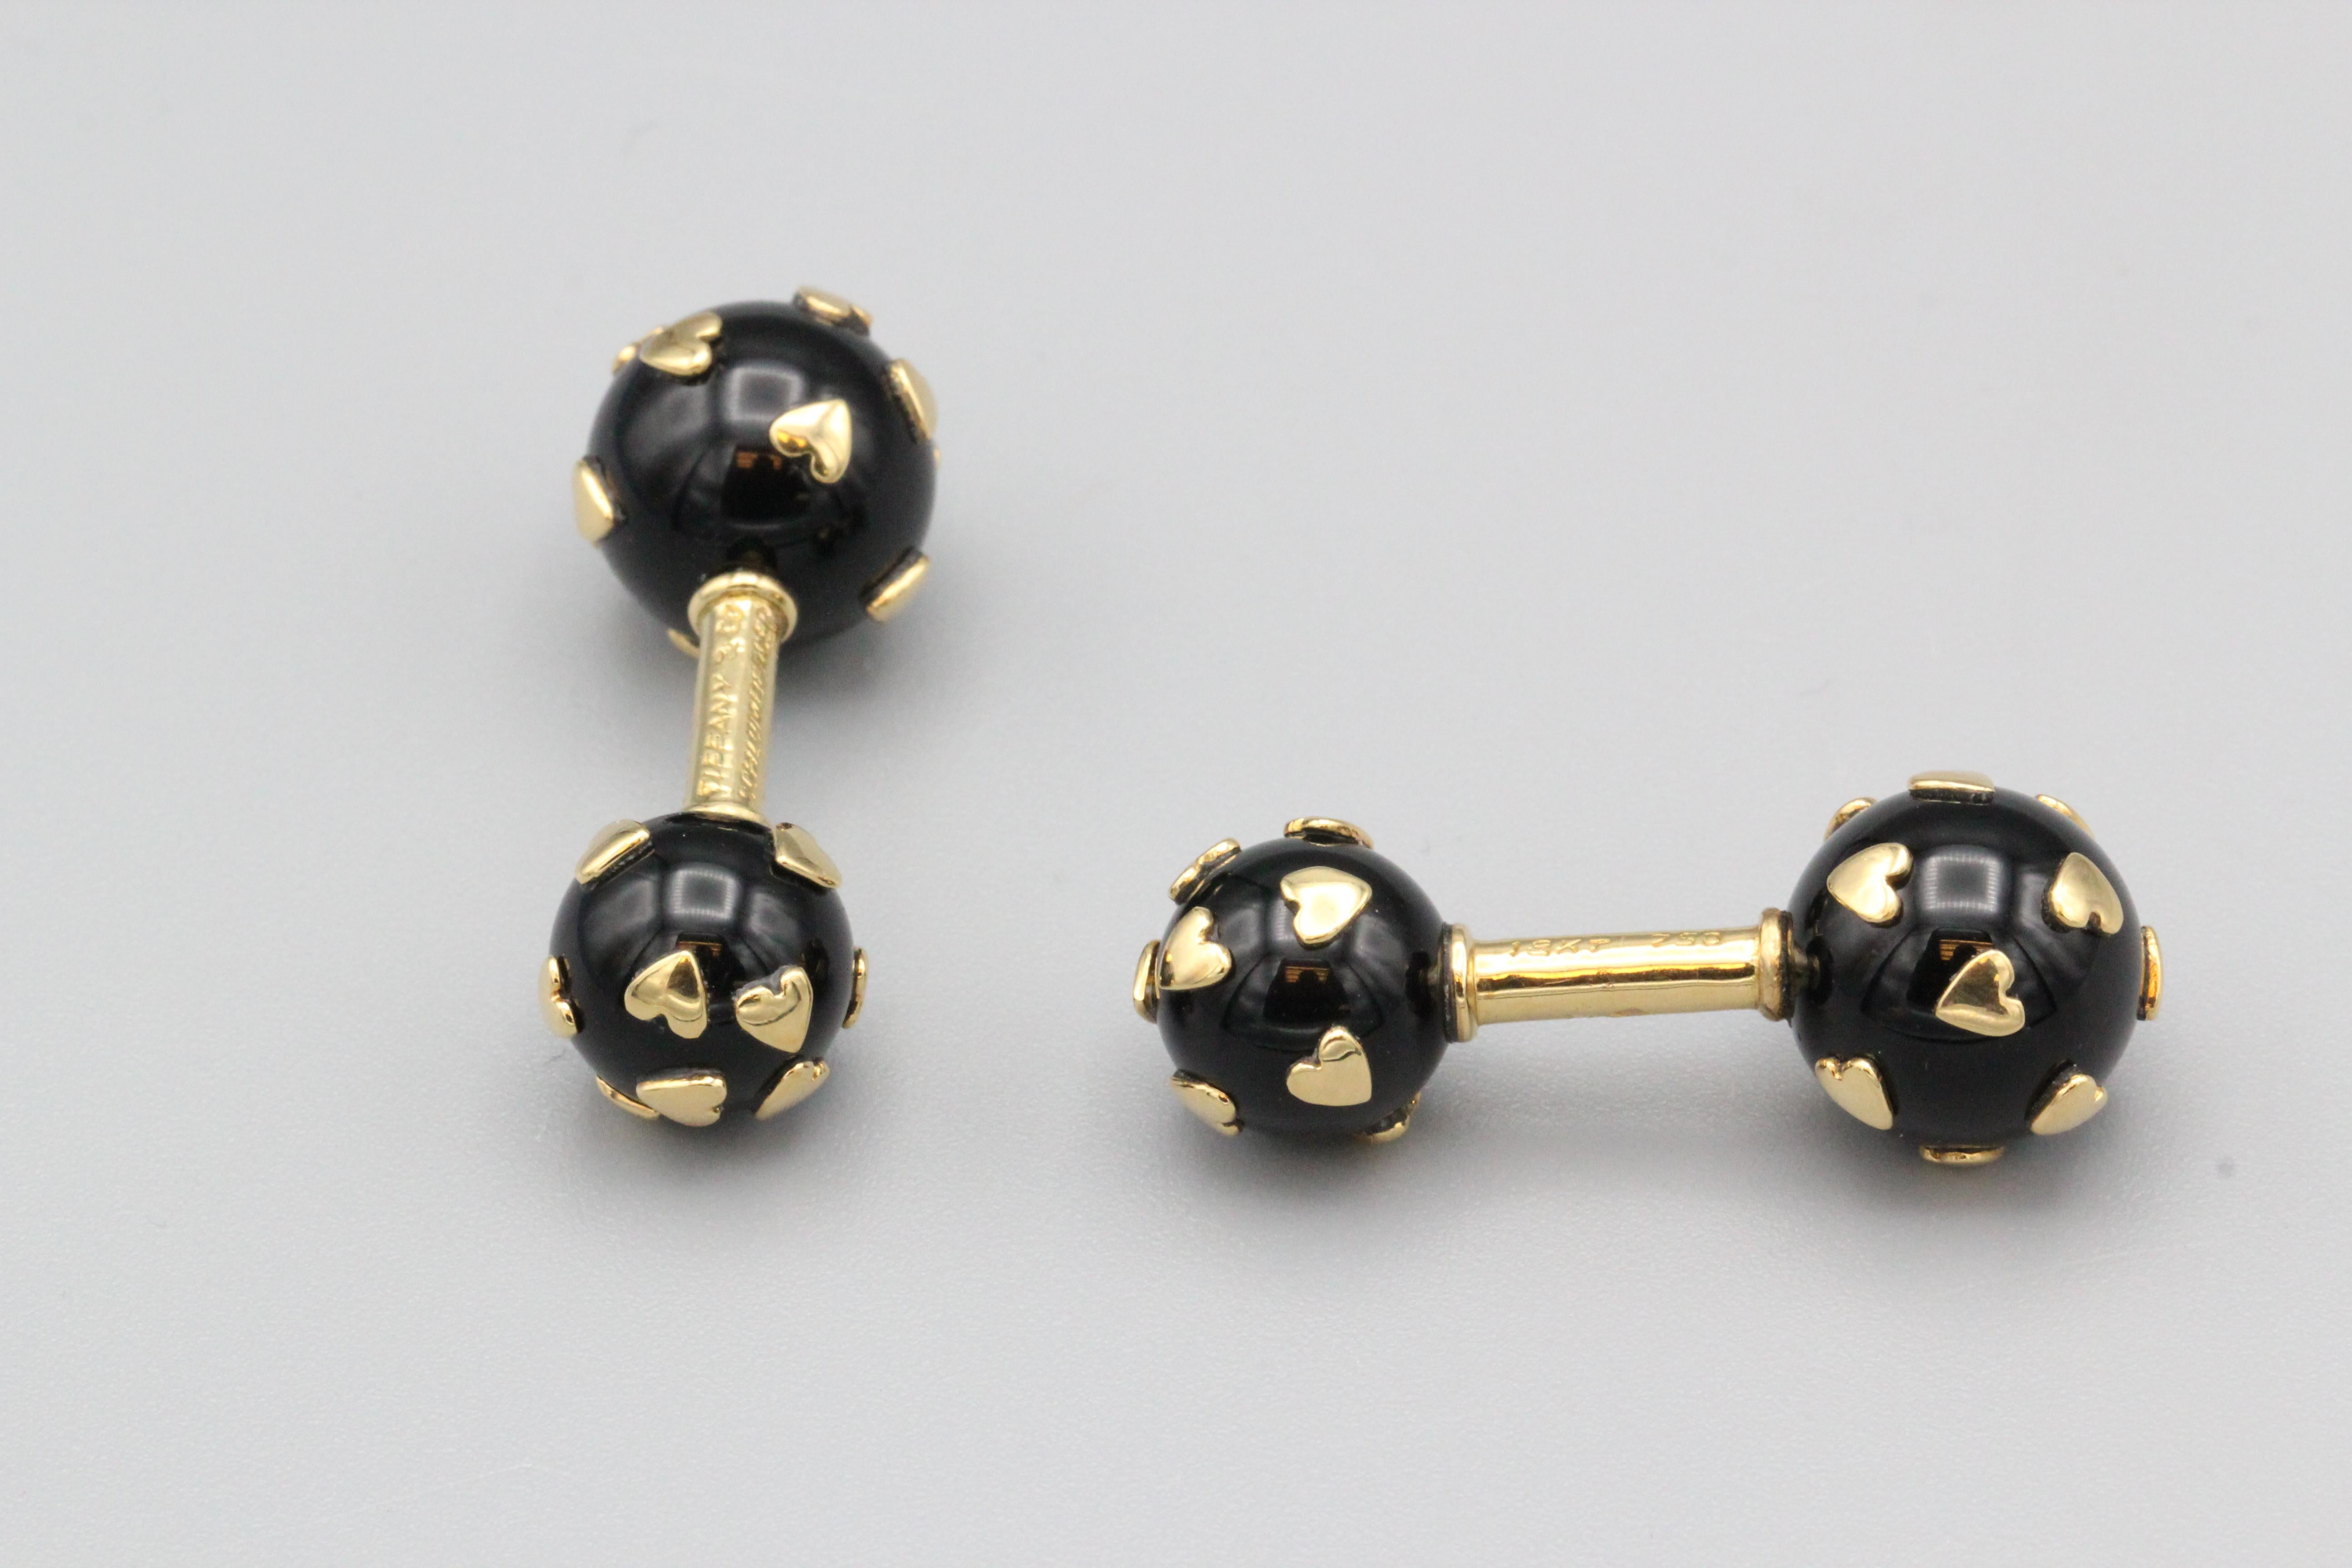 Fine pair of 18K yellow gold and onyx dumbbell cufflinks by Tiffany & Co. Schlumberger.  These cufflinks are made of fine polished onyx spheres that are studded with 18k gold heart shaped beads interspersed on each end.  Of very fine quality and